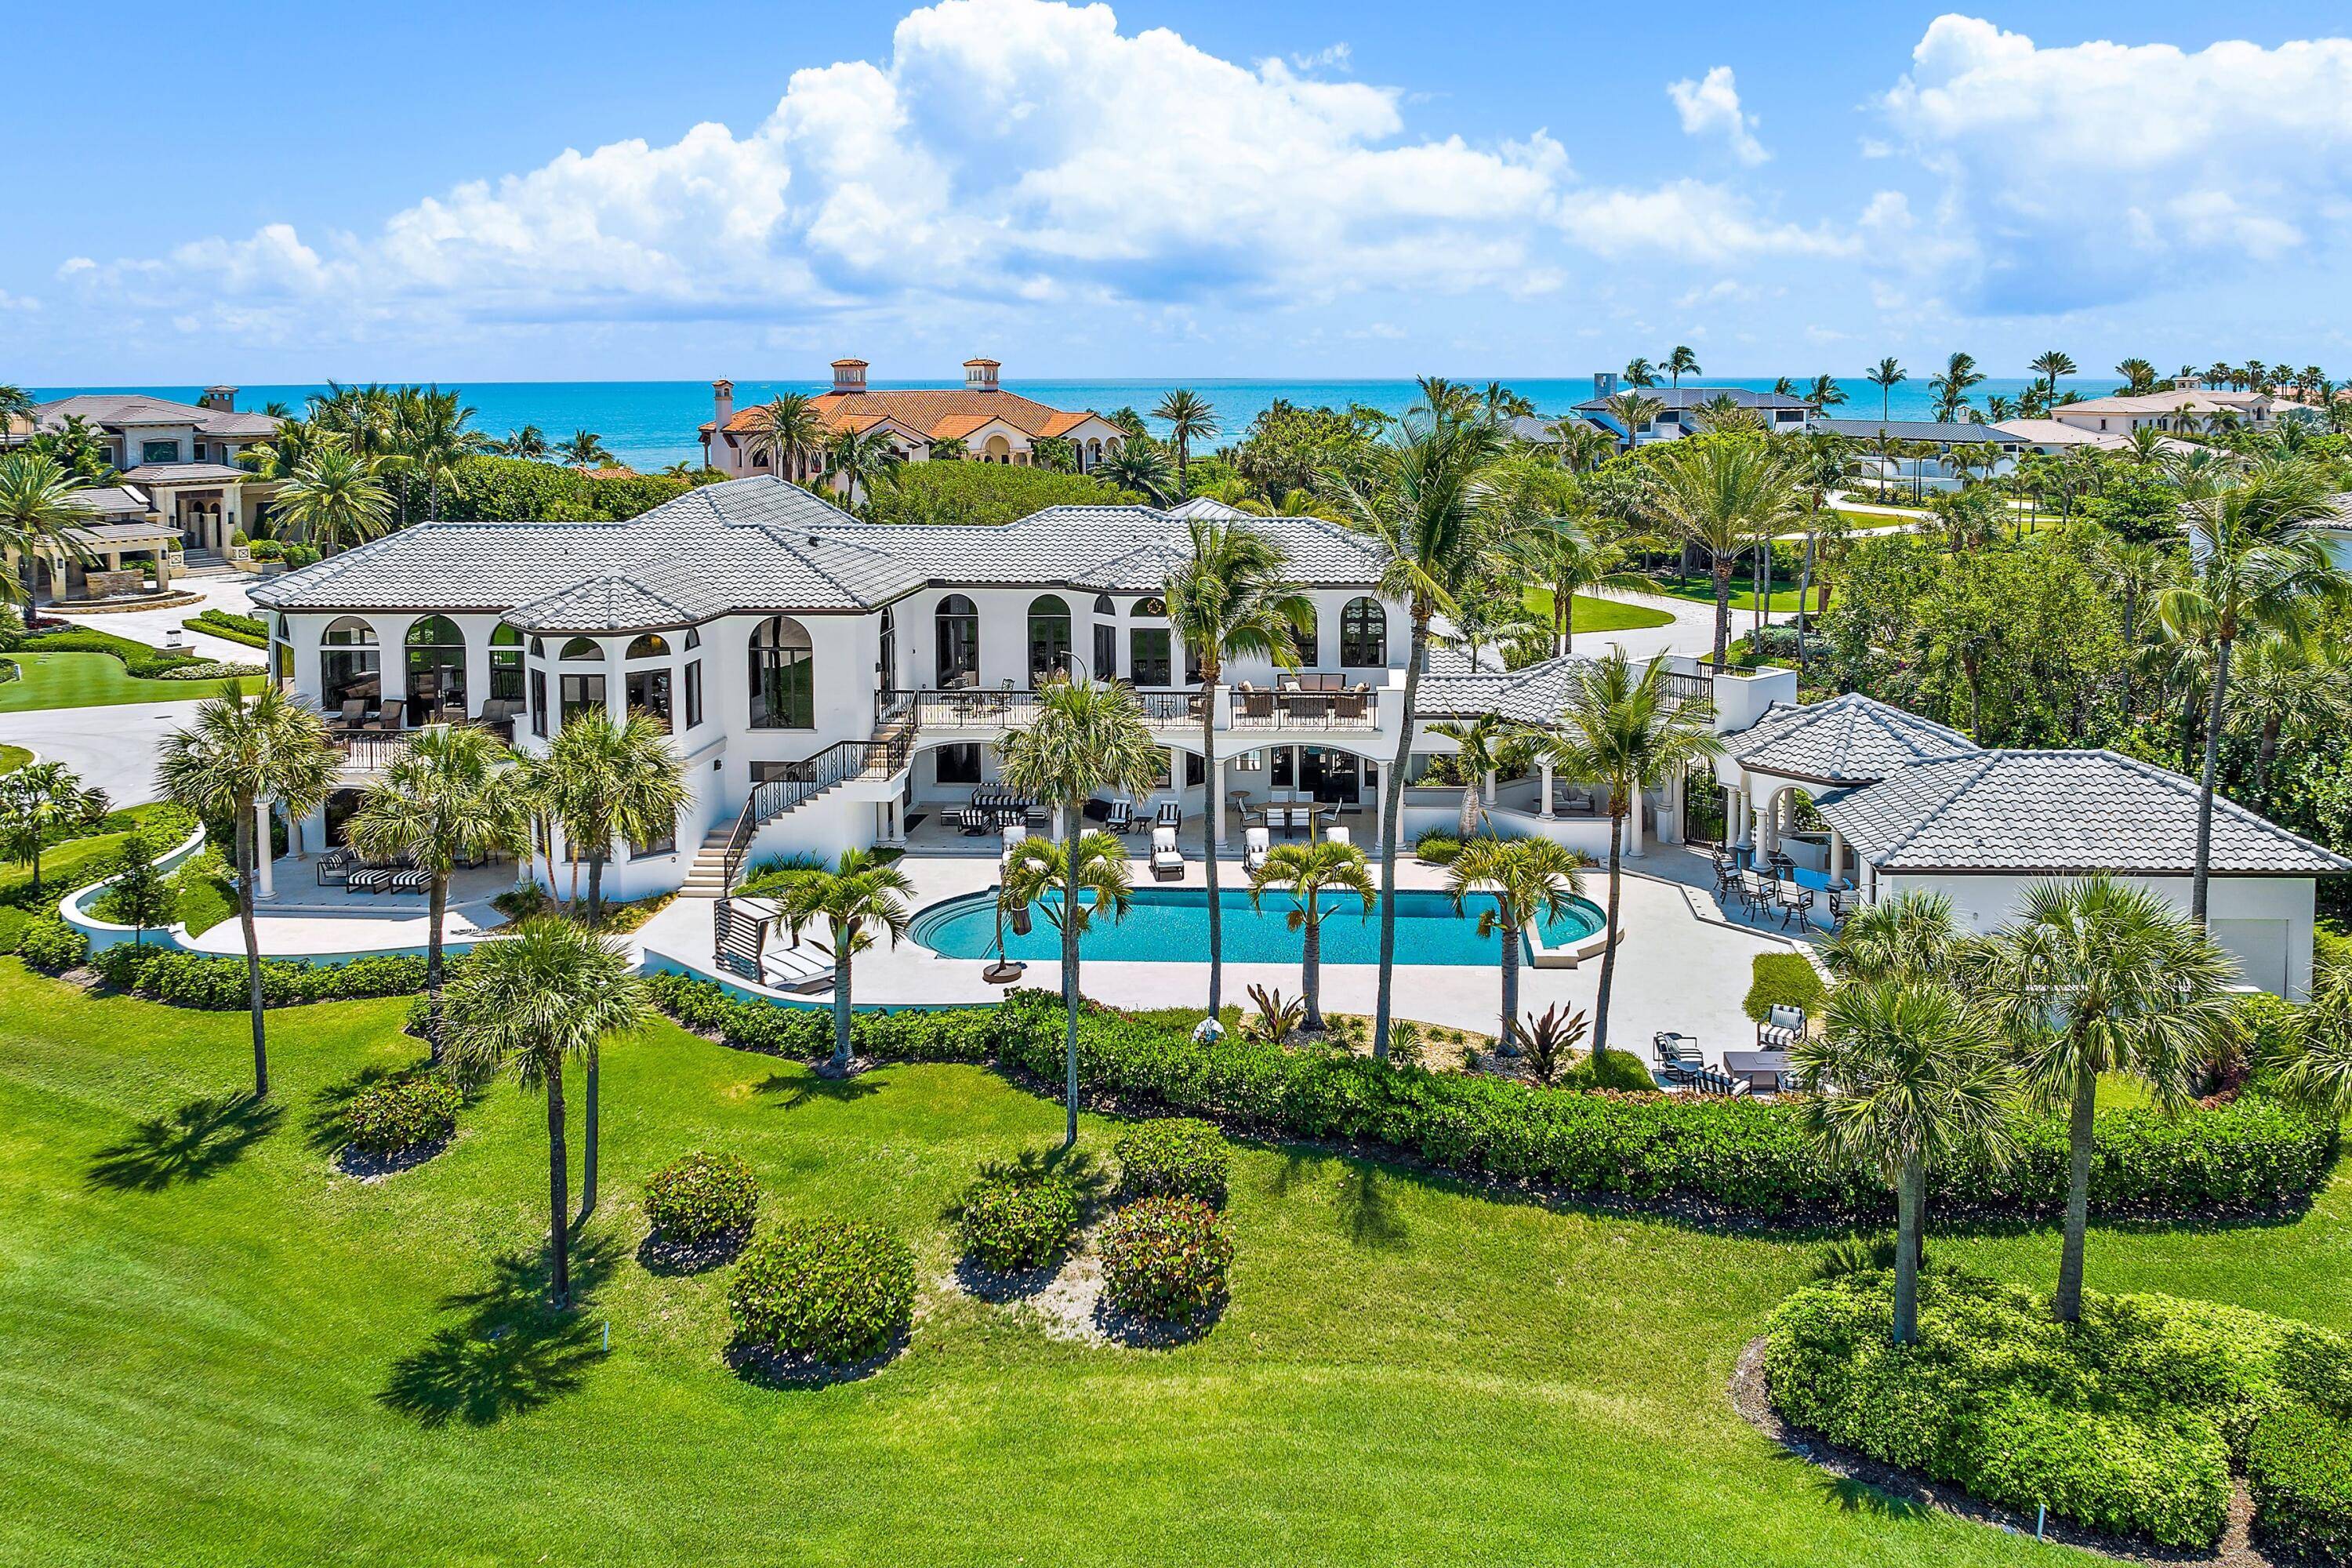 Nestled on one of the best lots in Sailfish Point designed to maximize panoramic views of Jack Nicklaus Signature golf course as well as lake ocean views.